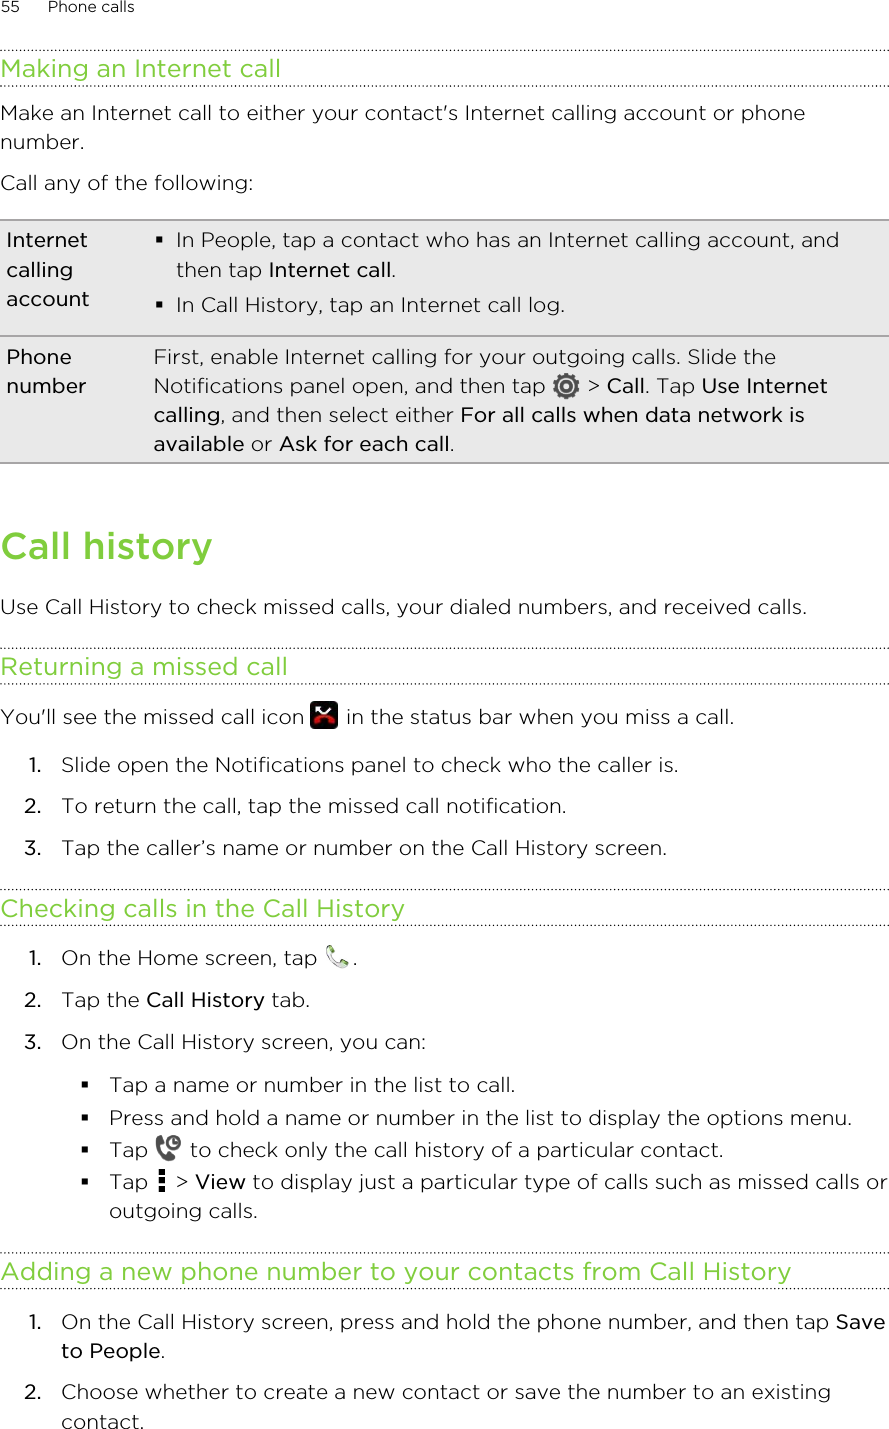 Making an Internet callMake an Internet call to either your contact&apos;s Internet calling account or phonenumber.Call any of the following:Internetcallingaccount§In People, tap a contact who has an Internet calling account, andthen tap Internet call.§In Call History, tap an Internet call log.PhonenumberFirst, enable Internet calling for your outgoing calls. Slide theNotifications panel open, and then tap   &gt; Call. Tap Use Internetcalling, and then select either For all calls when data network isavailable or Ask for each call.Call historyUse Call History to check missed calls, your dialed numbers, and received calls.Returning a missed callYou&apos;ll see the missed call icon   in the status bar when you miss a call.1. Slide open the Notifications panel to check who the caller is.2. To return the call, tap the missed call notification.3. Tap the caller’s name or number on the Call History screen.Checking calls in the Call History1. On the Home screen, tap  .2. Tap the Call History tab.3. On the Call History screen, you can:§Tap a name or number in the list to call.§Press and hold a name or number in the list to display the options menu.§Tap   to check only the call history of a particular contact.§Tap   &gt; View to display just a particular type of calls such as missed calls oroutgoing calls.Adding a new phone number to your contacts from Call History1. On the Call History screen, press and hold the phone number, and then tap Saveto People.2. Choose whether to create a new contact or save the number to an existingcontact.55 Phone calls